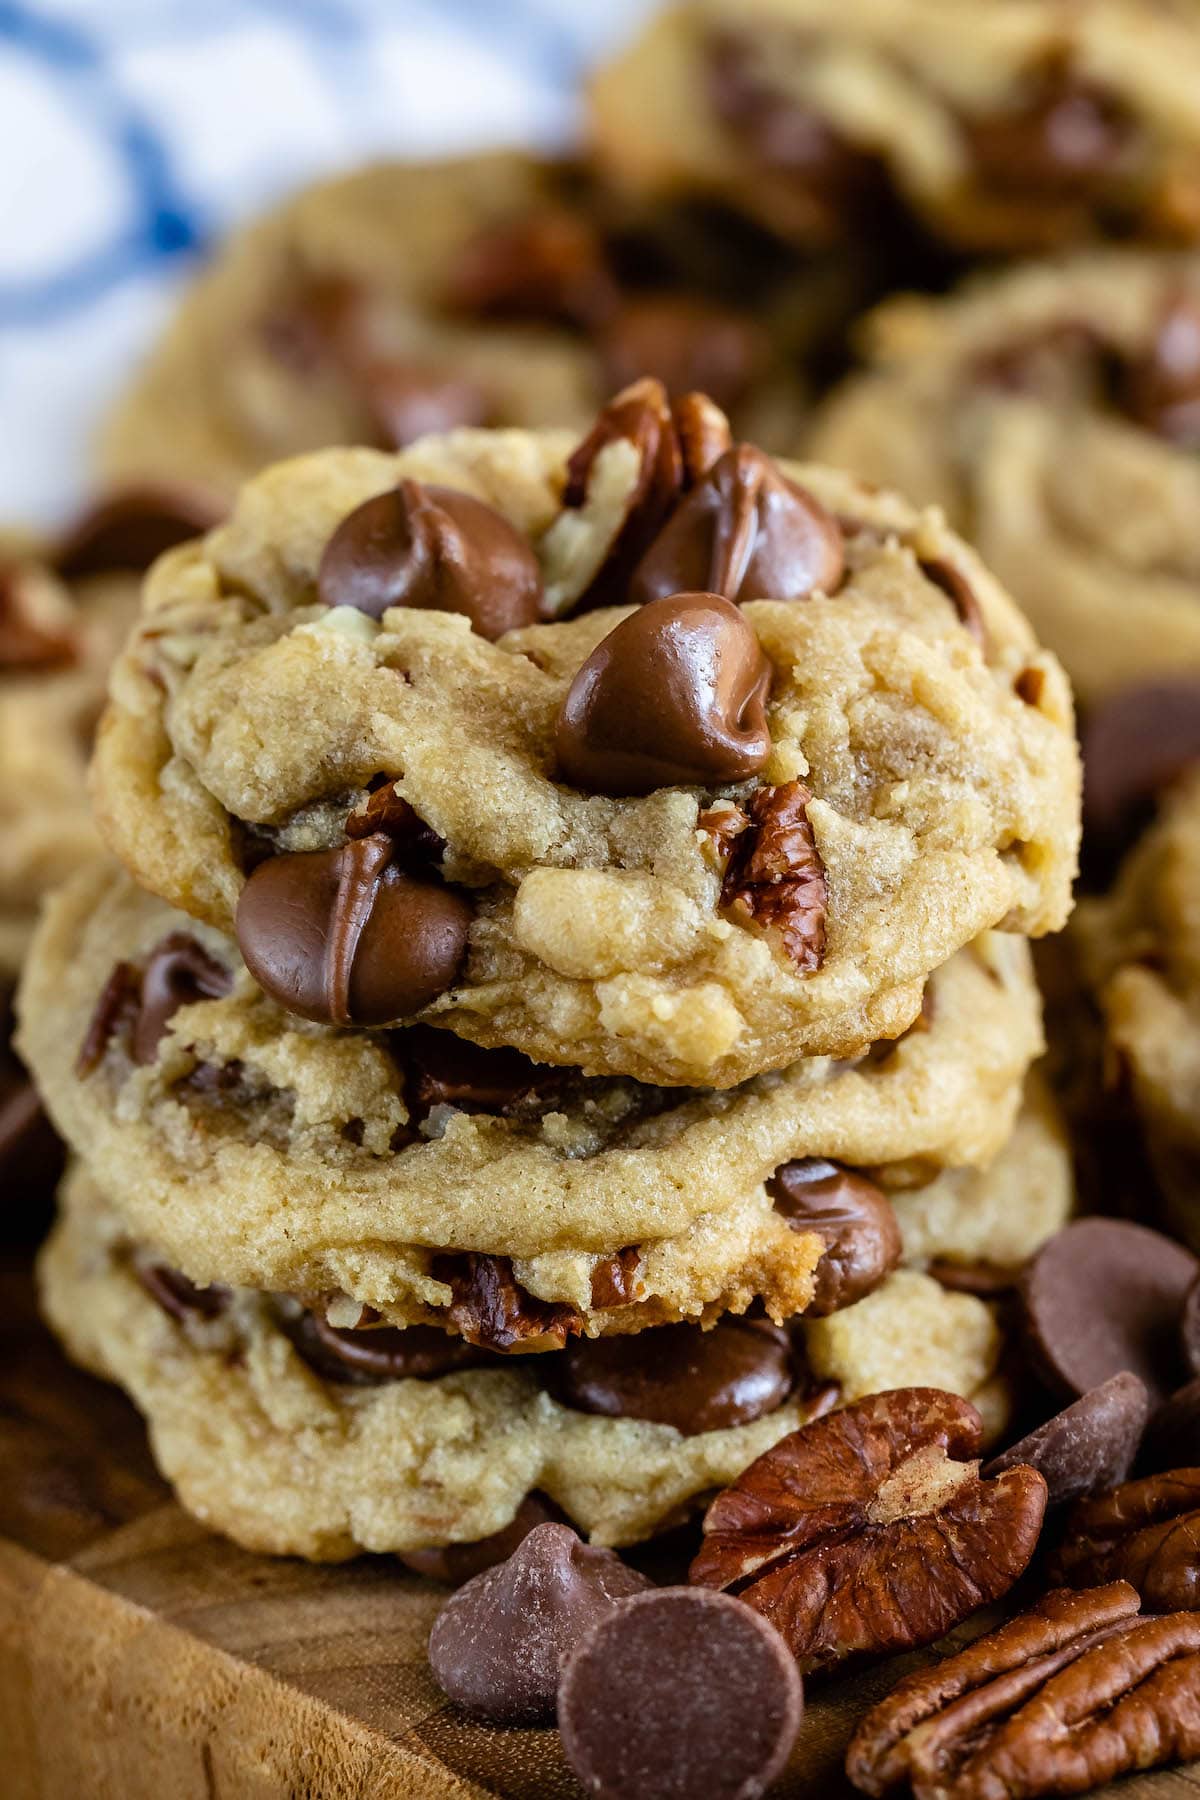 stacked chocolate chip cookies with pecans baked in.